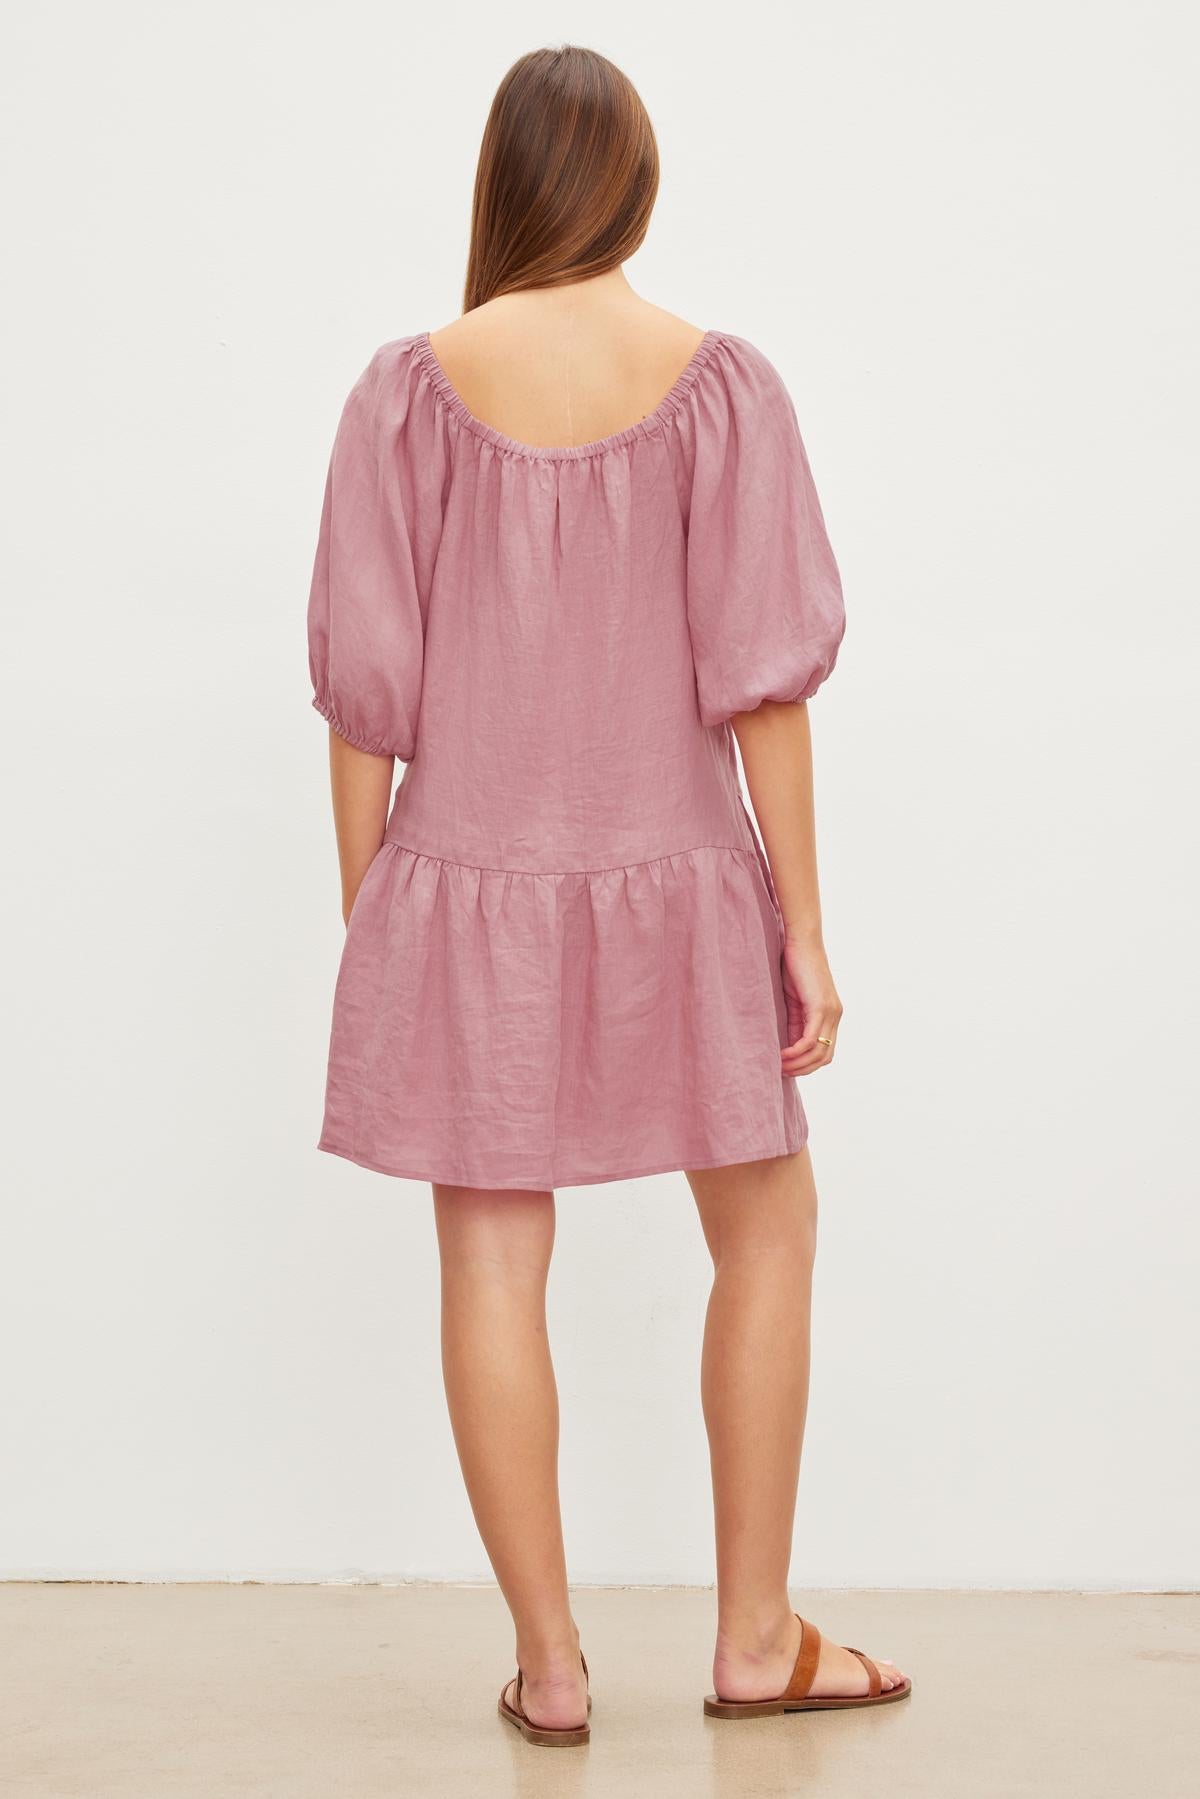   Woman viewed from behind wearing a pink, off-the-shoulder IRINA LINEN TIERED DRESS by Velvet by Graham & Spencer, with a ruffled hem and elastic neckline, standing against a plain background. 